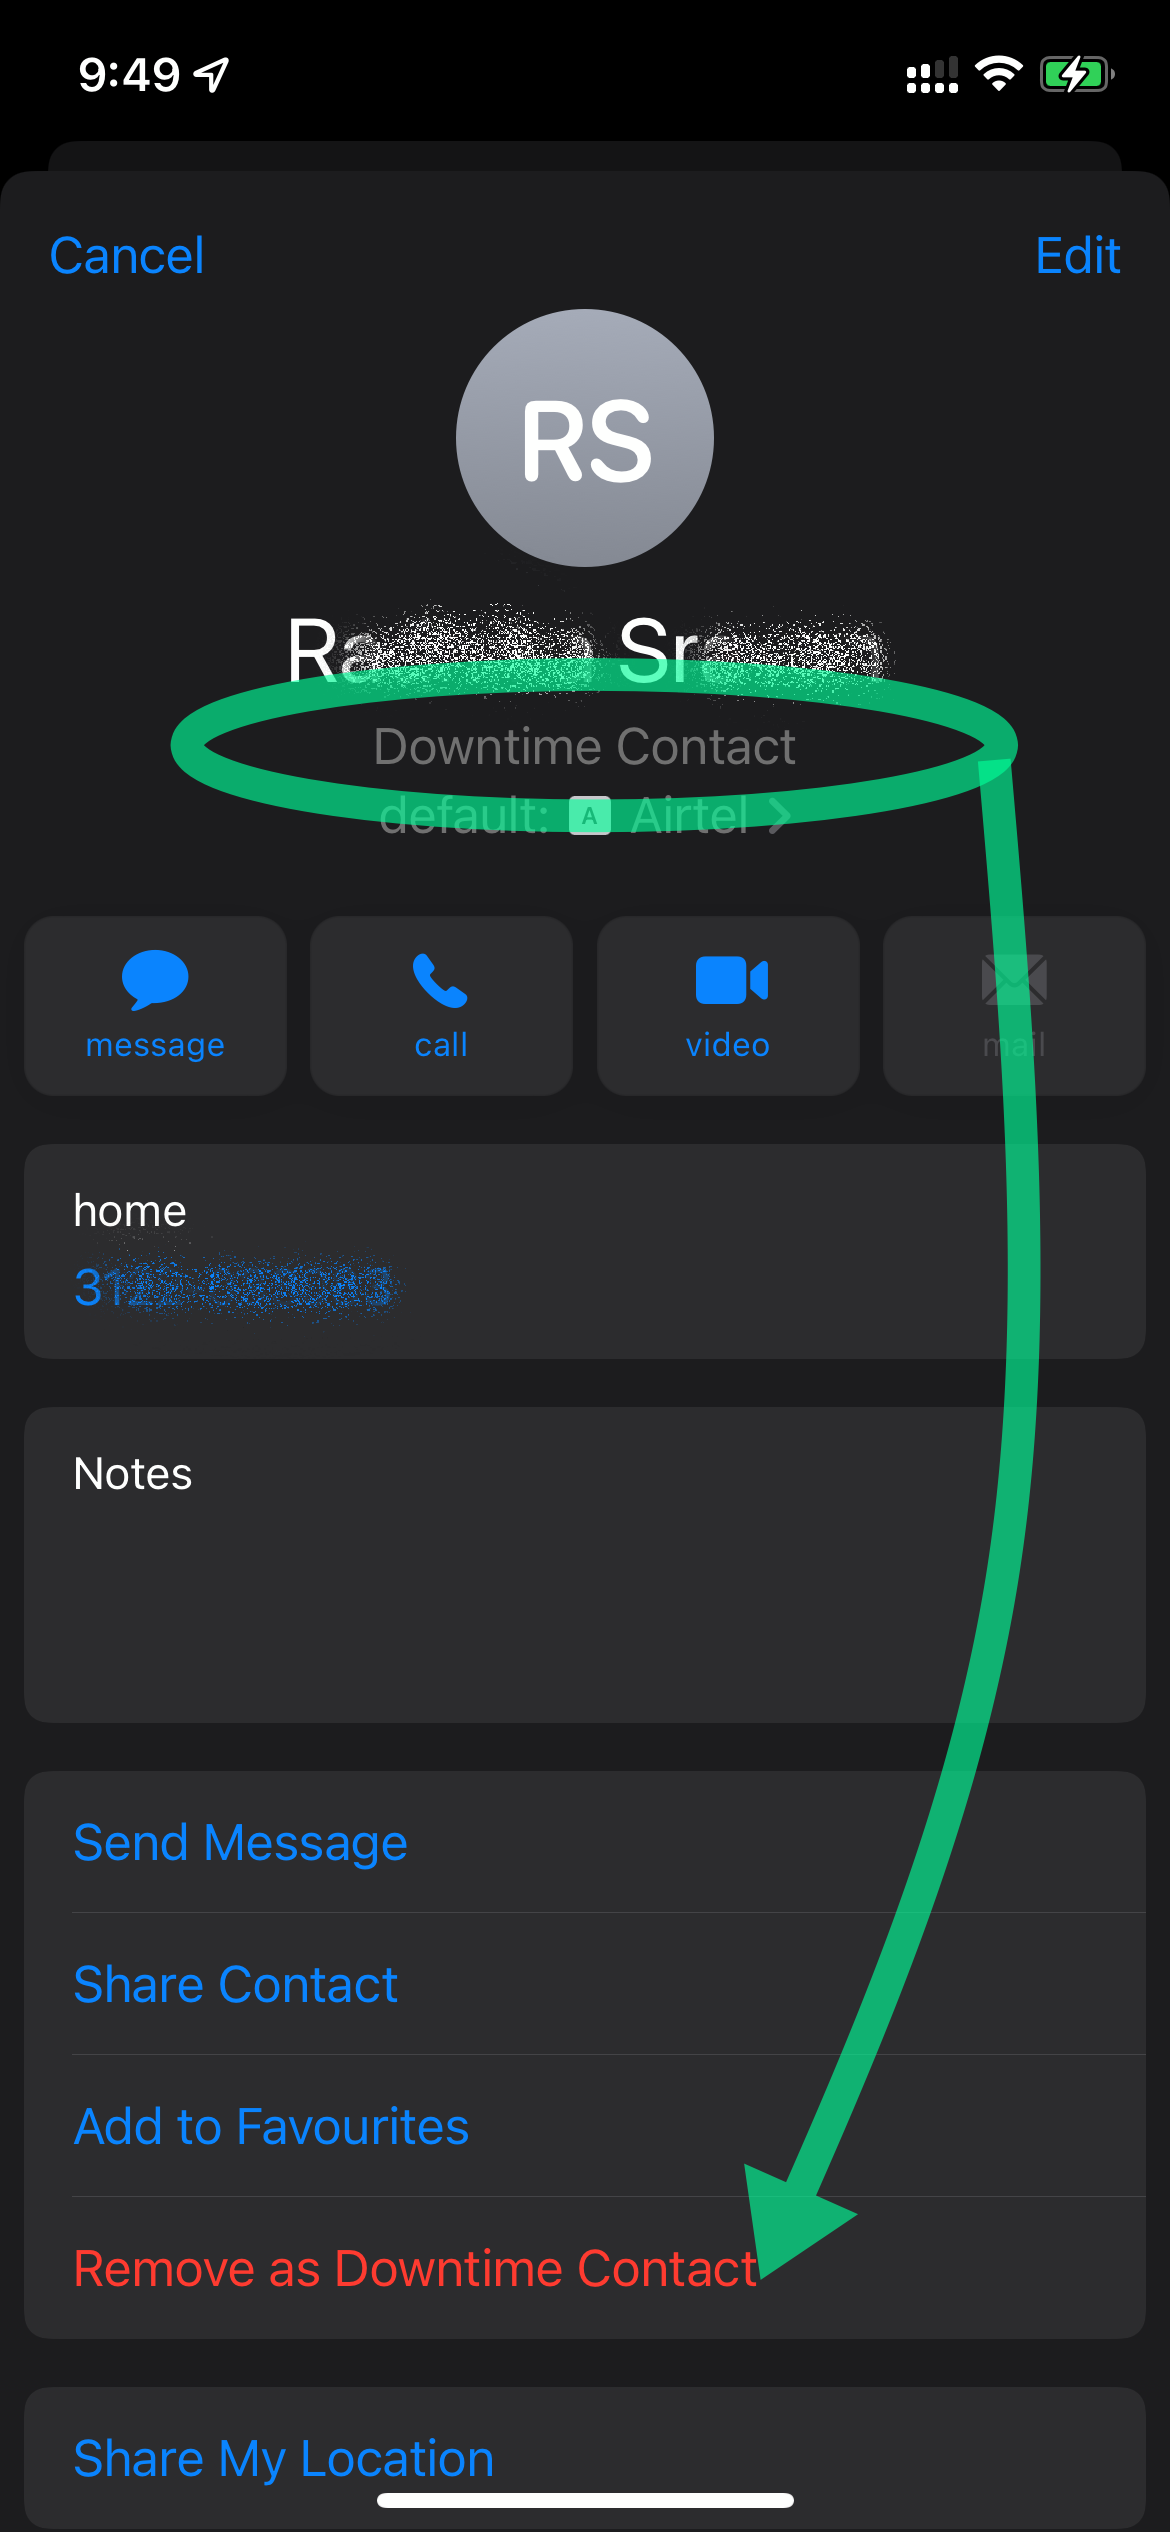 What is Downtime Contact 🔓 ? - Apple Community